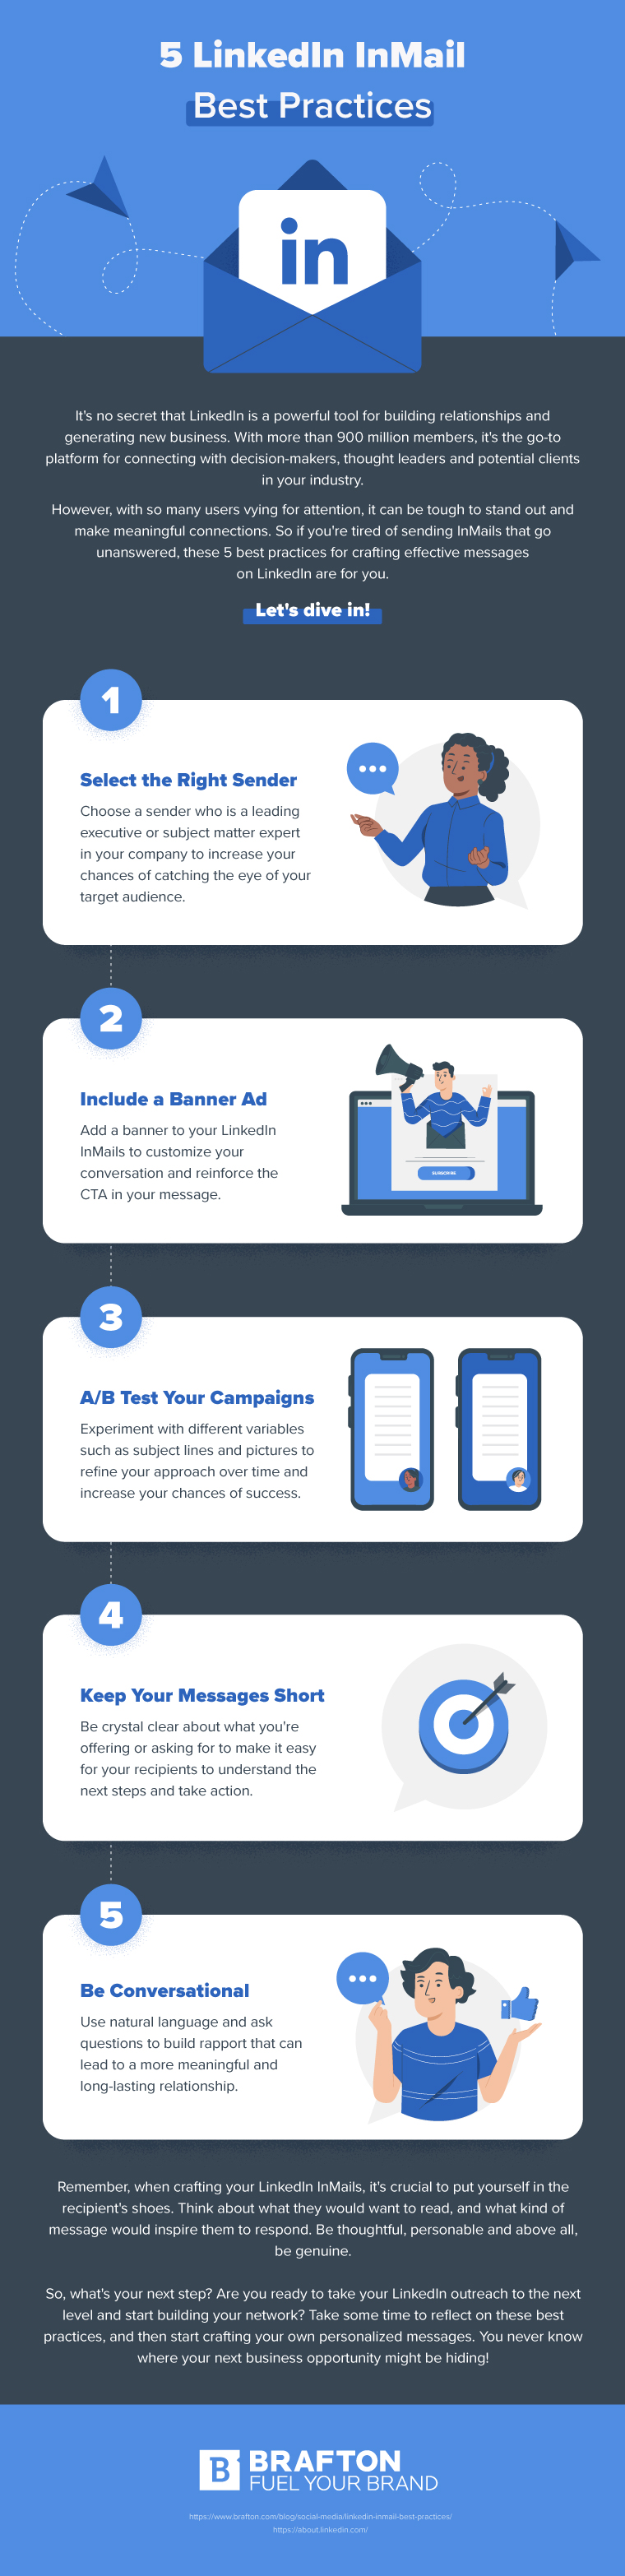 5 LinkedIn InMail Best Practices infographic